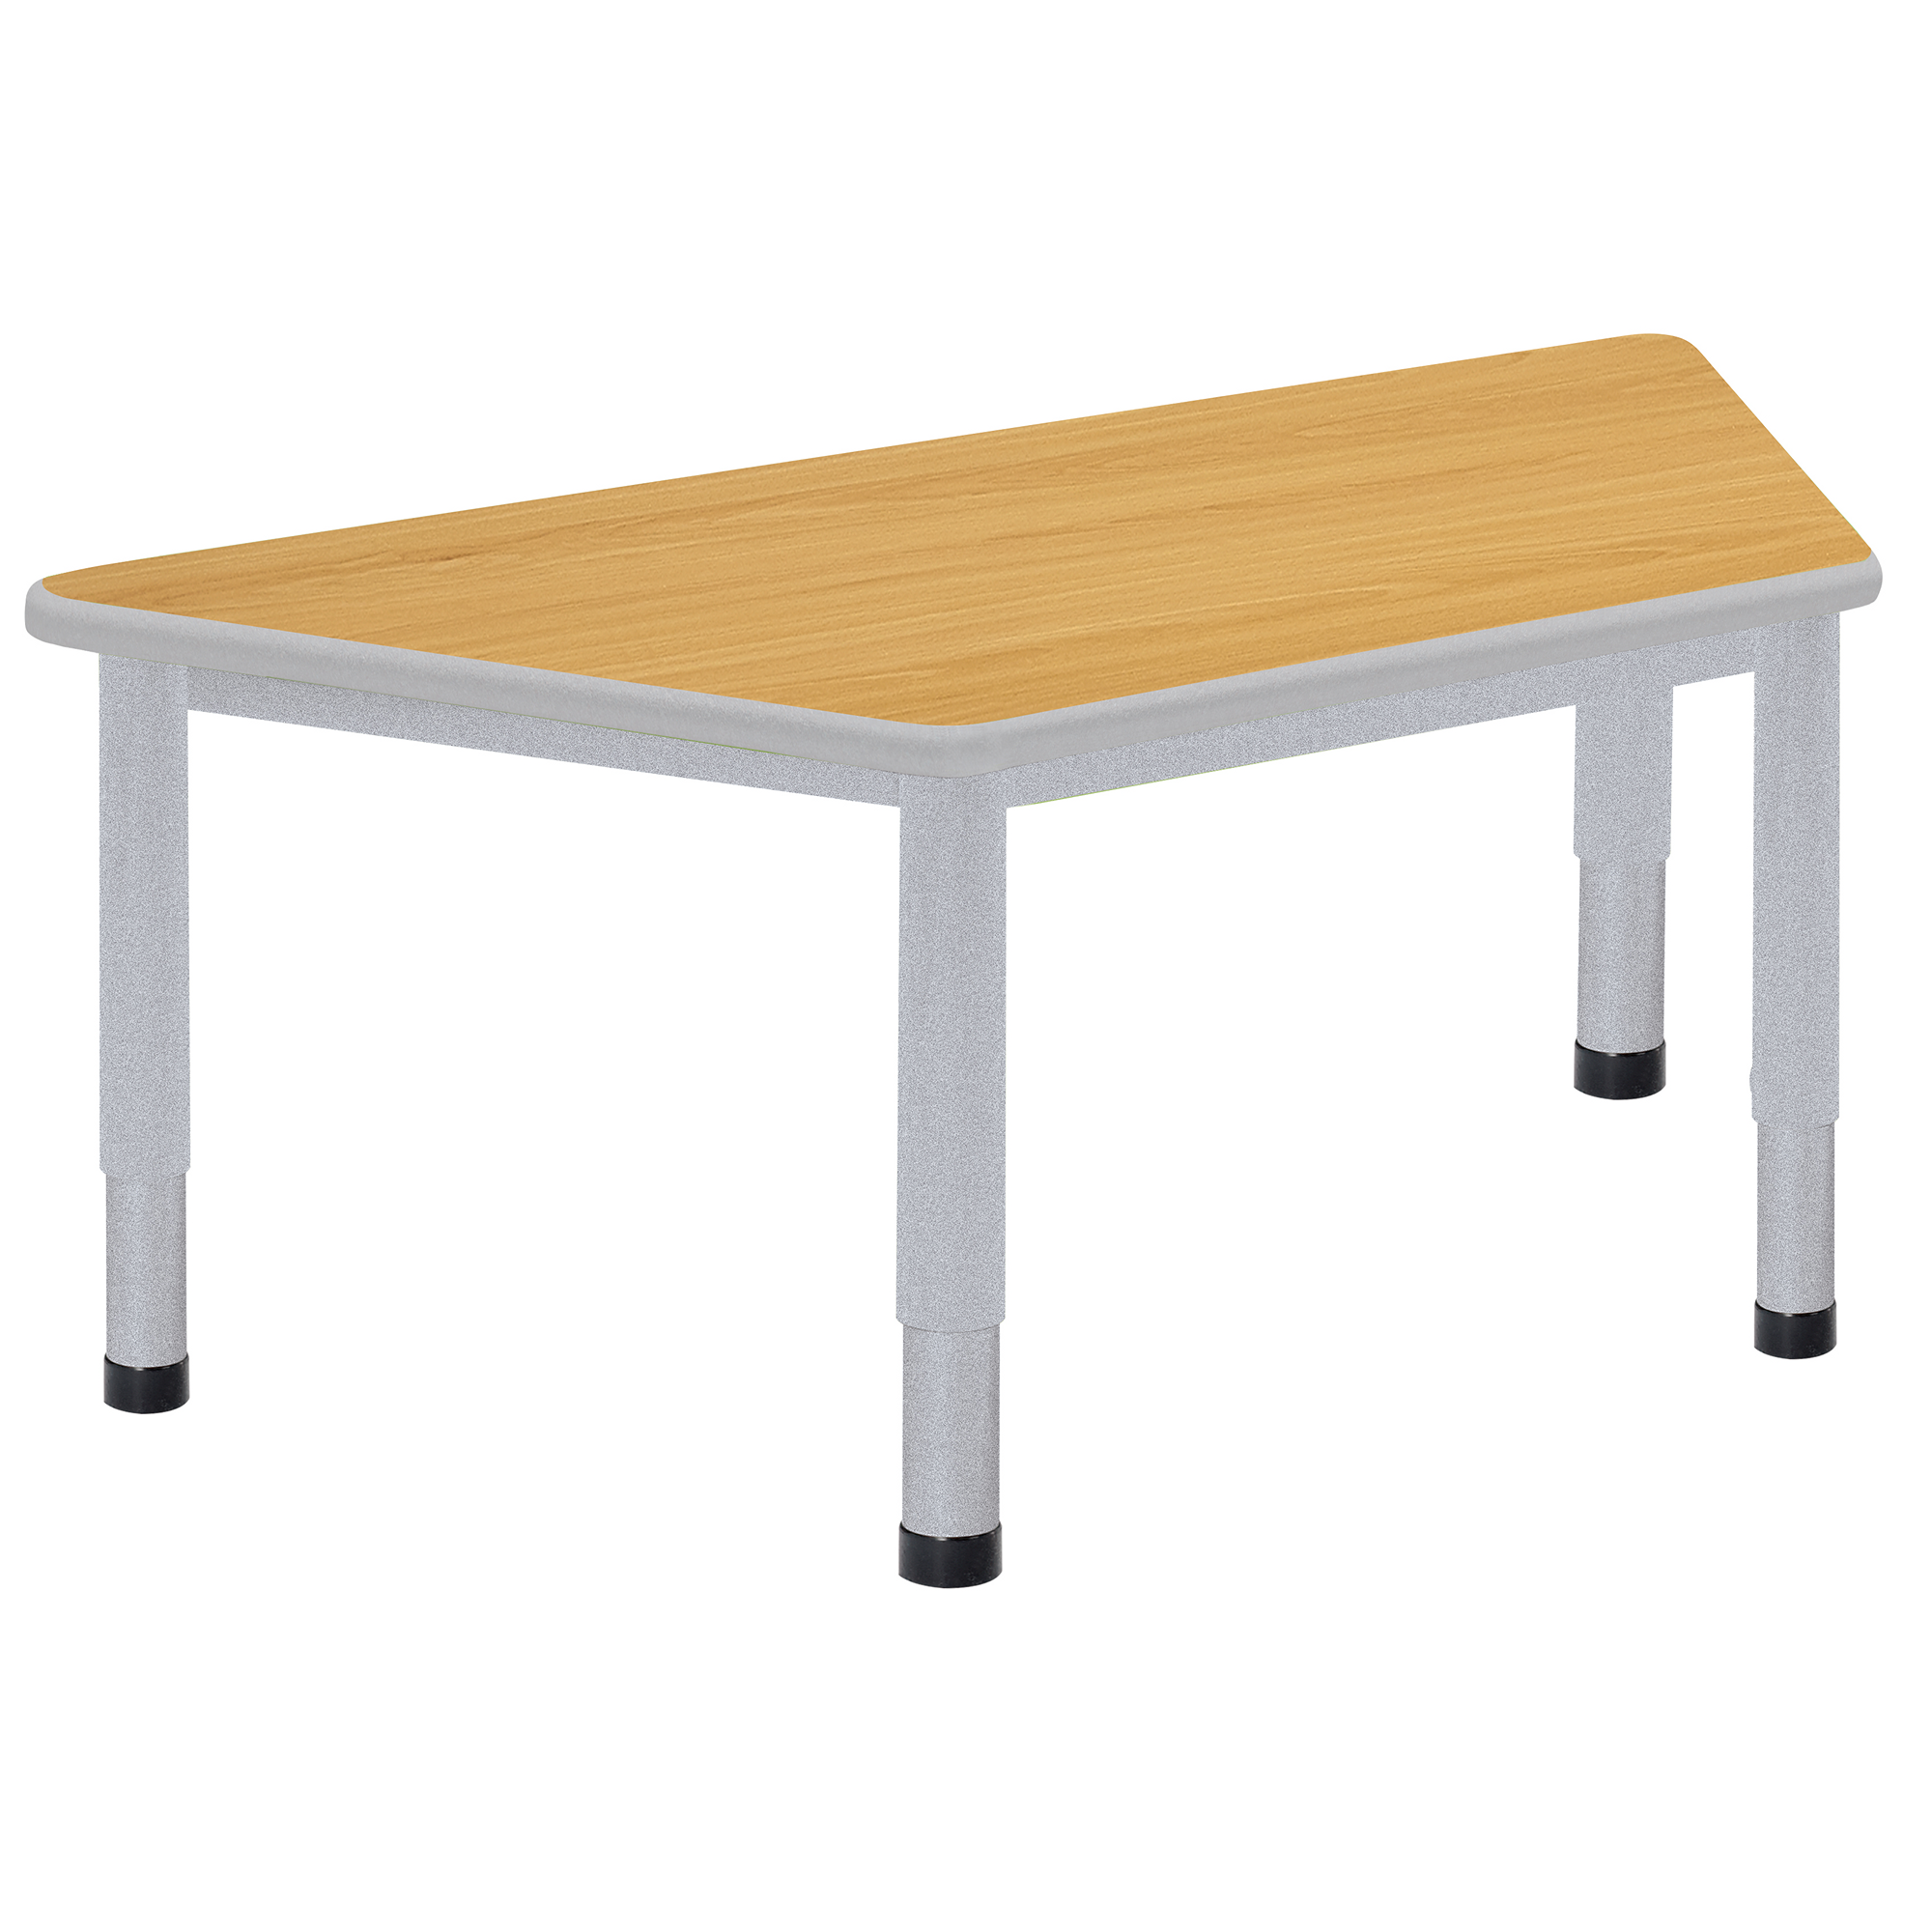 Harlequin Trap Table Beech